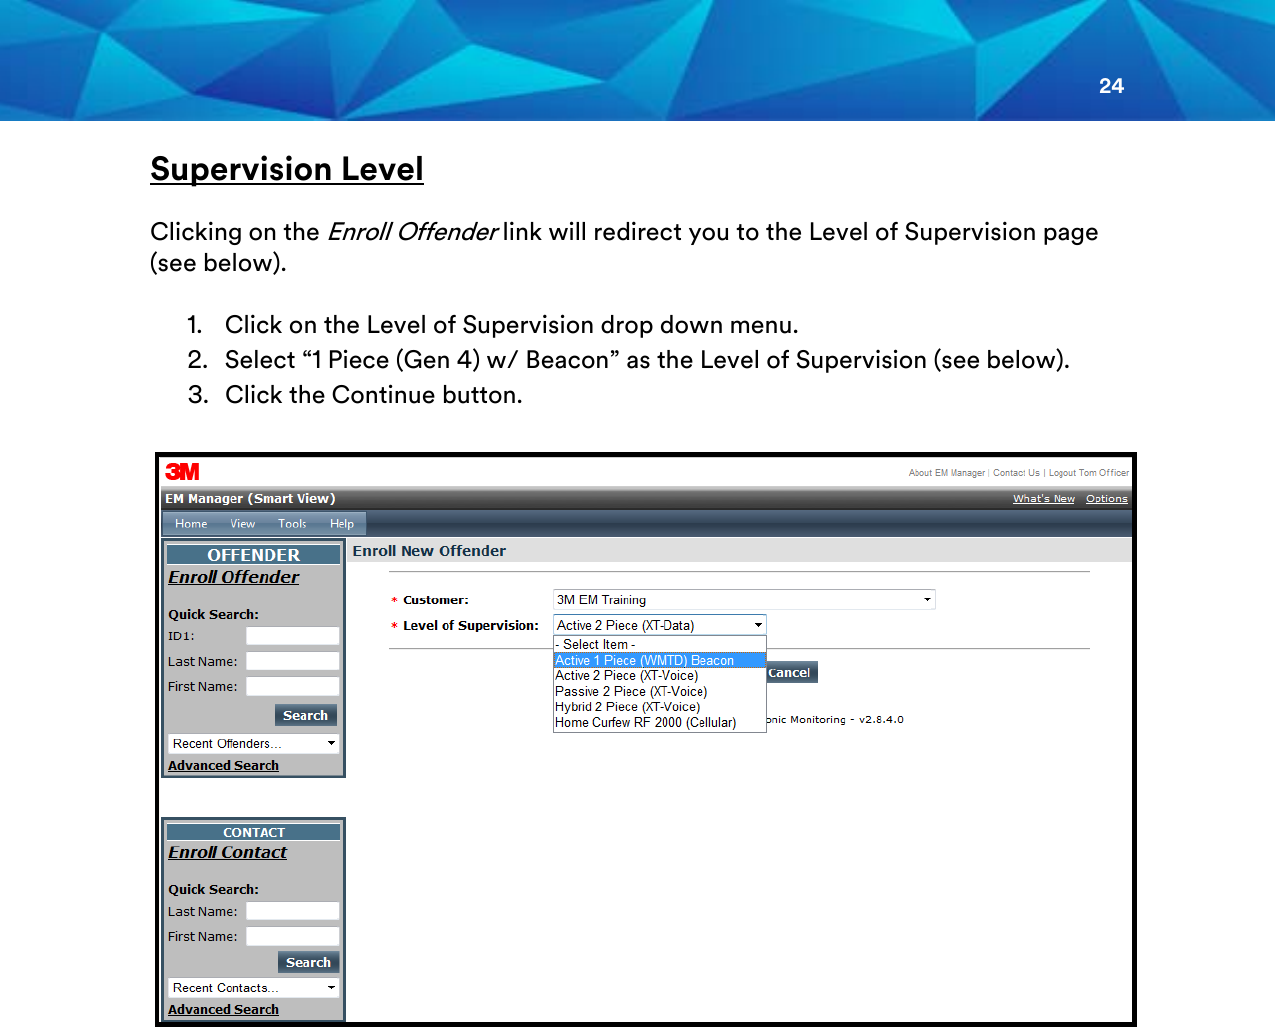 24  Supervision Level  Clicking on the Enroll Offender link will redirect you to the Level of Supervision page (see below).   1. Click on the Level of Supervision drop down menu. 2. Select “1 Piece (Gen 4) w/ Beacon” as the Level of Supervision (see below). 3. Click the Continue button.                   